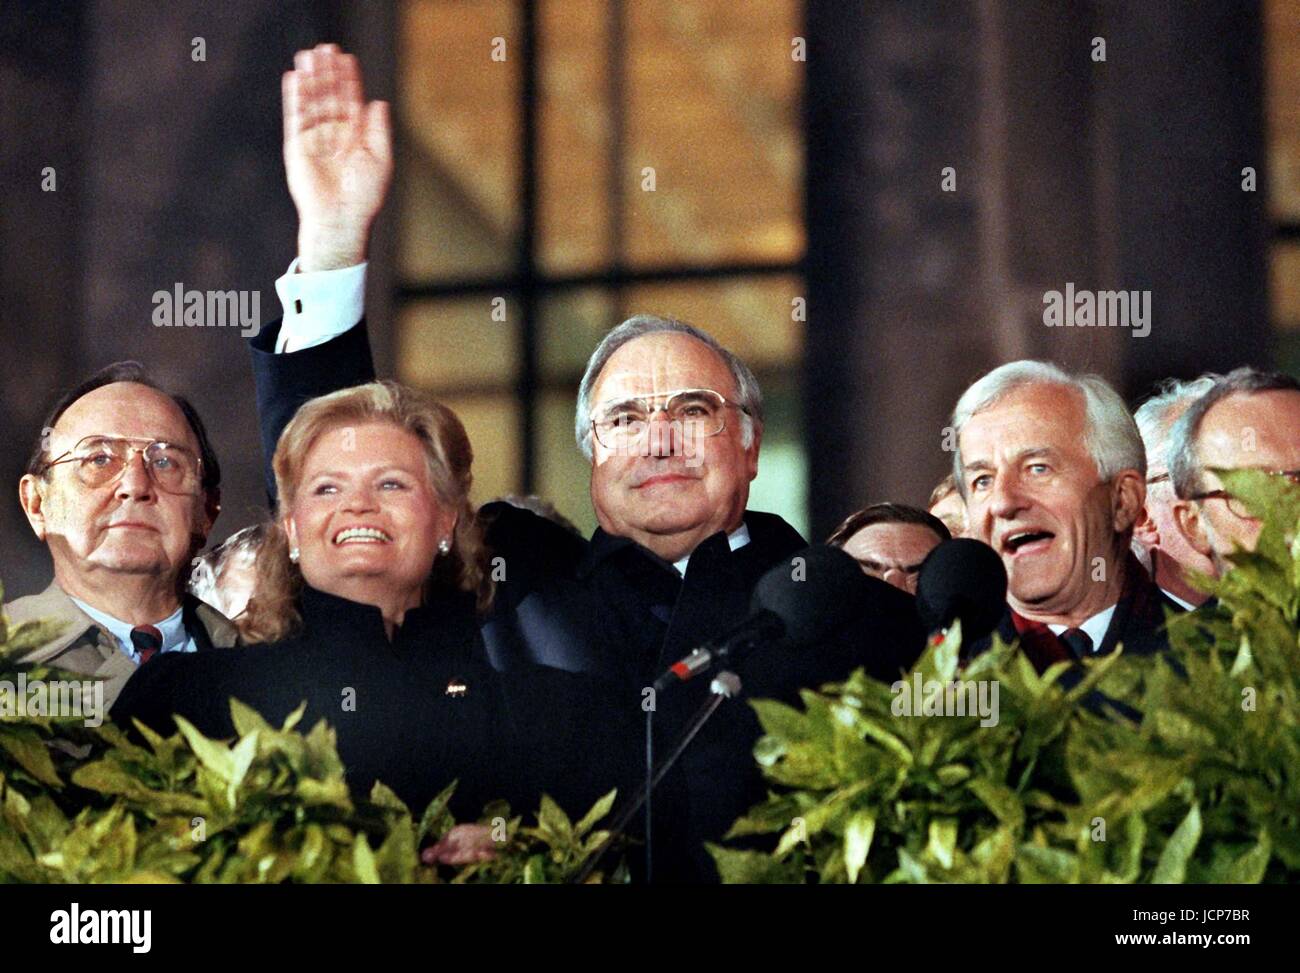 FILE - (L-R) Then German Foreign Minister Hans-Dietrich Genscher, Hannelore Kohl, then German Chancellor Helmut Kohl, then German President Richard von Weizsaecker and Lothar de Maiziere (half concealed), the last Prime Minister of the German Democratic Republic (GDR), at the celebrations in Berlin, Germany, 03 October 1990. Helmut Kohl died at the age of 87 on 16 June 2017. Photo: Wolfgang Kumm/dpa Stock Photo